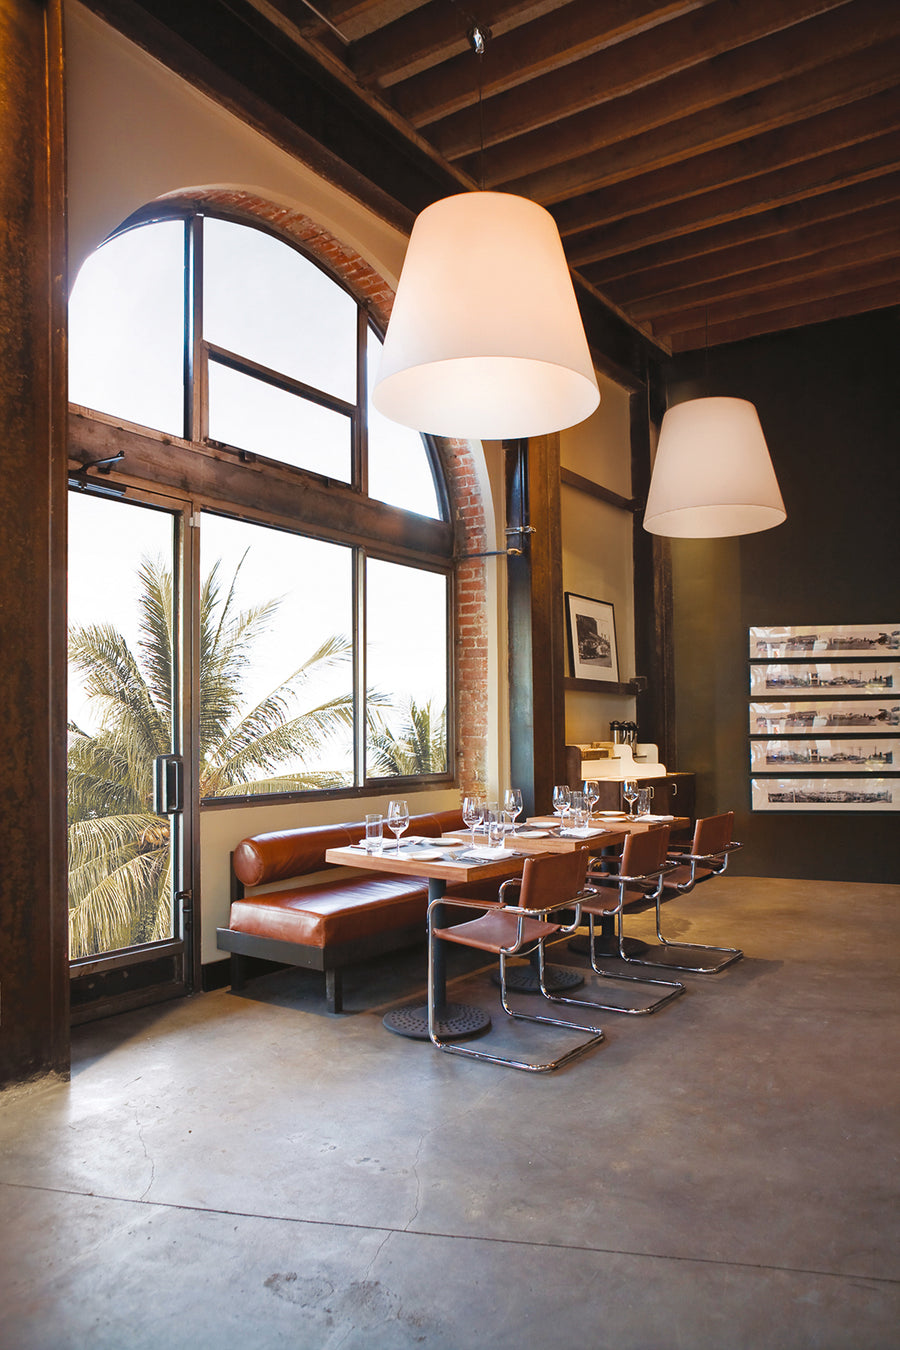 AMAX Suspension Lamp by Charles Williams for Fontana Arte - DUPLEX DESIGN